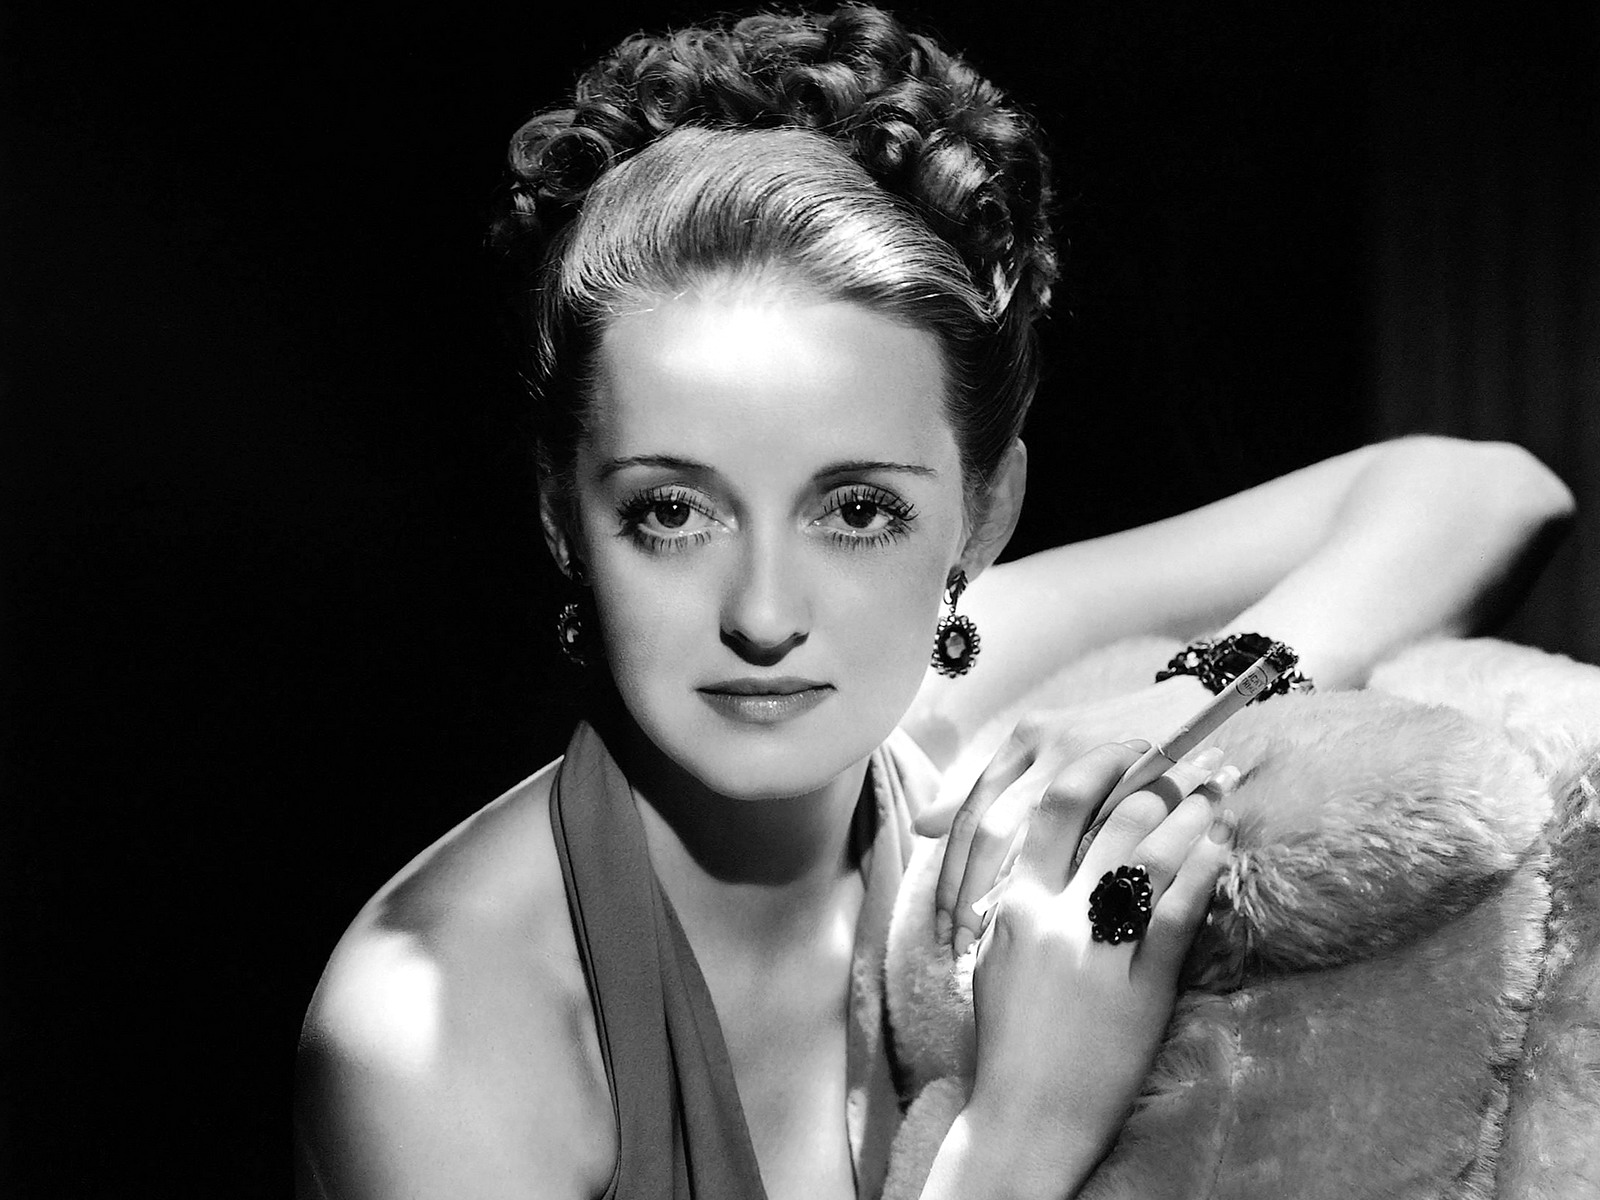 Bette Davis: The Hollywood ***** (SHE seduced her leading men and ...